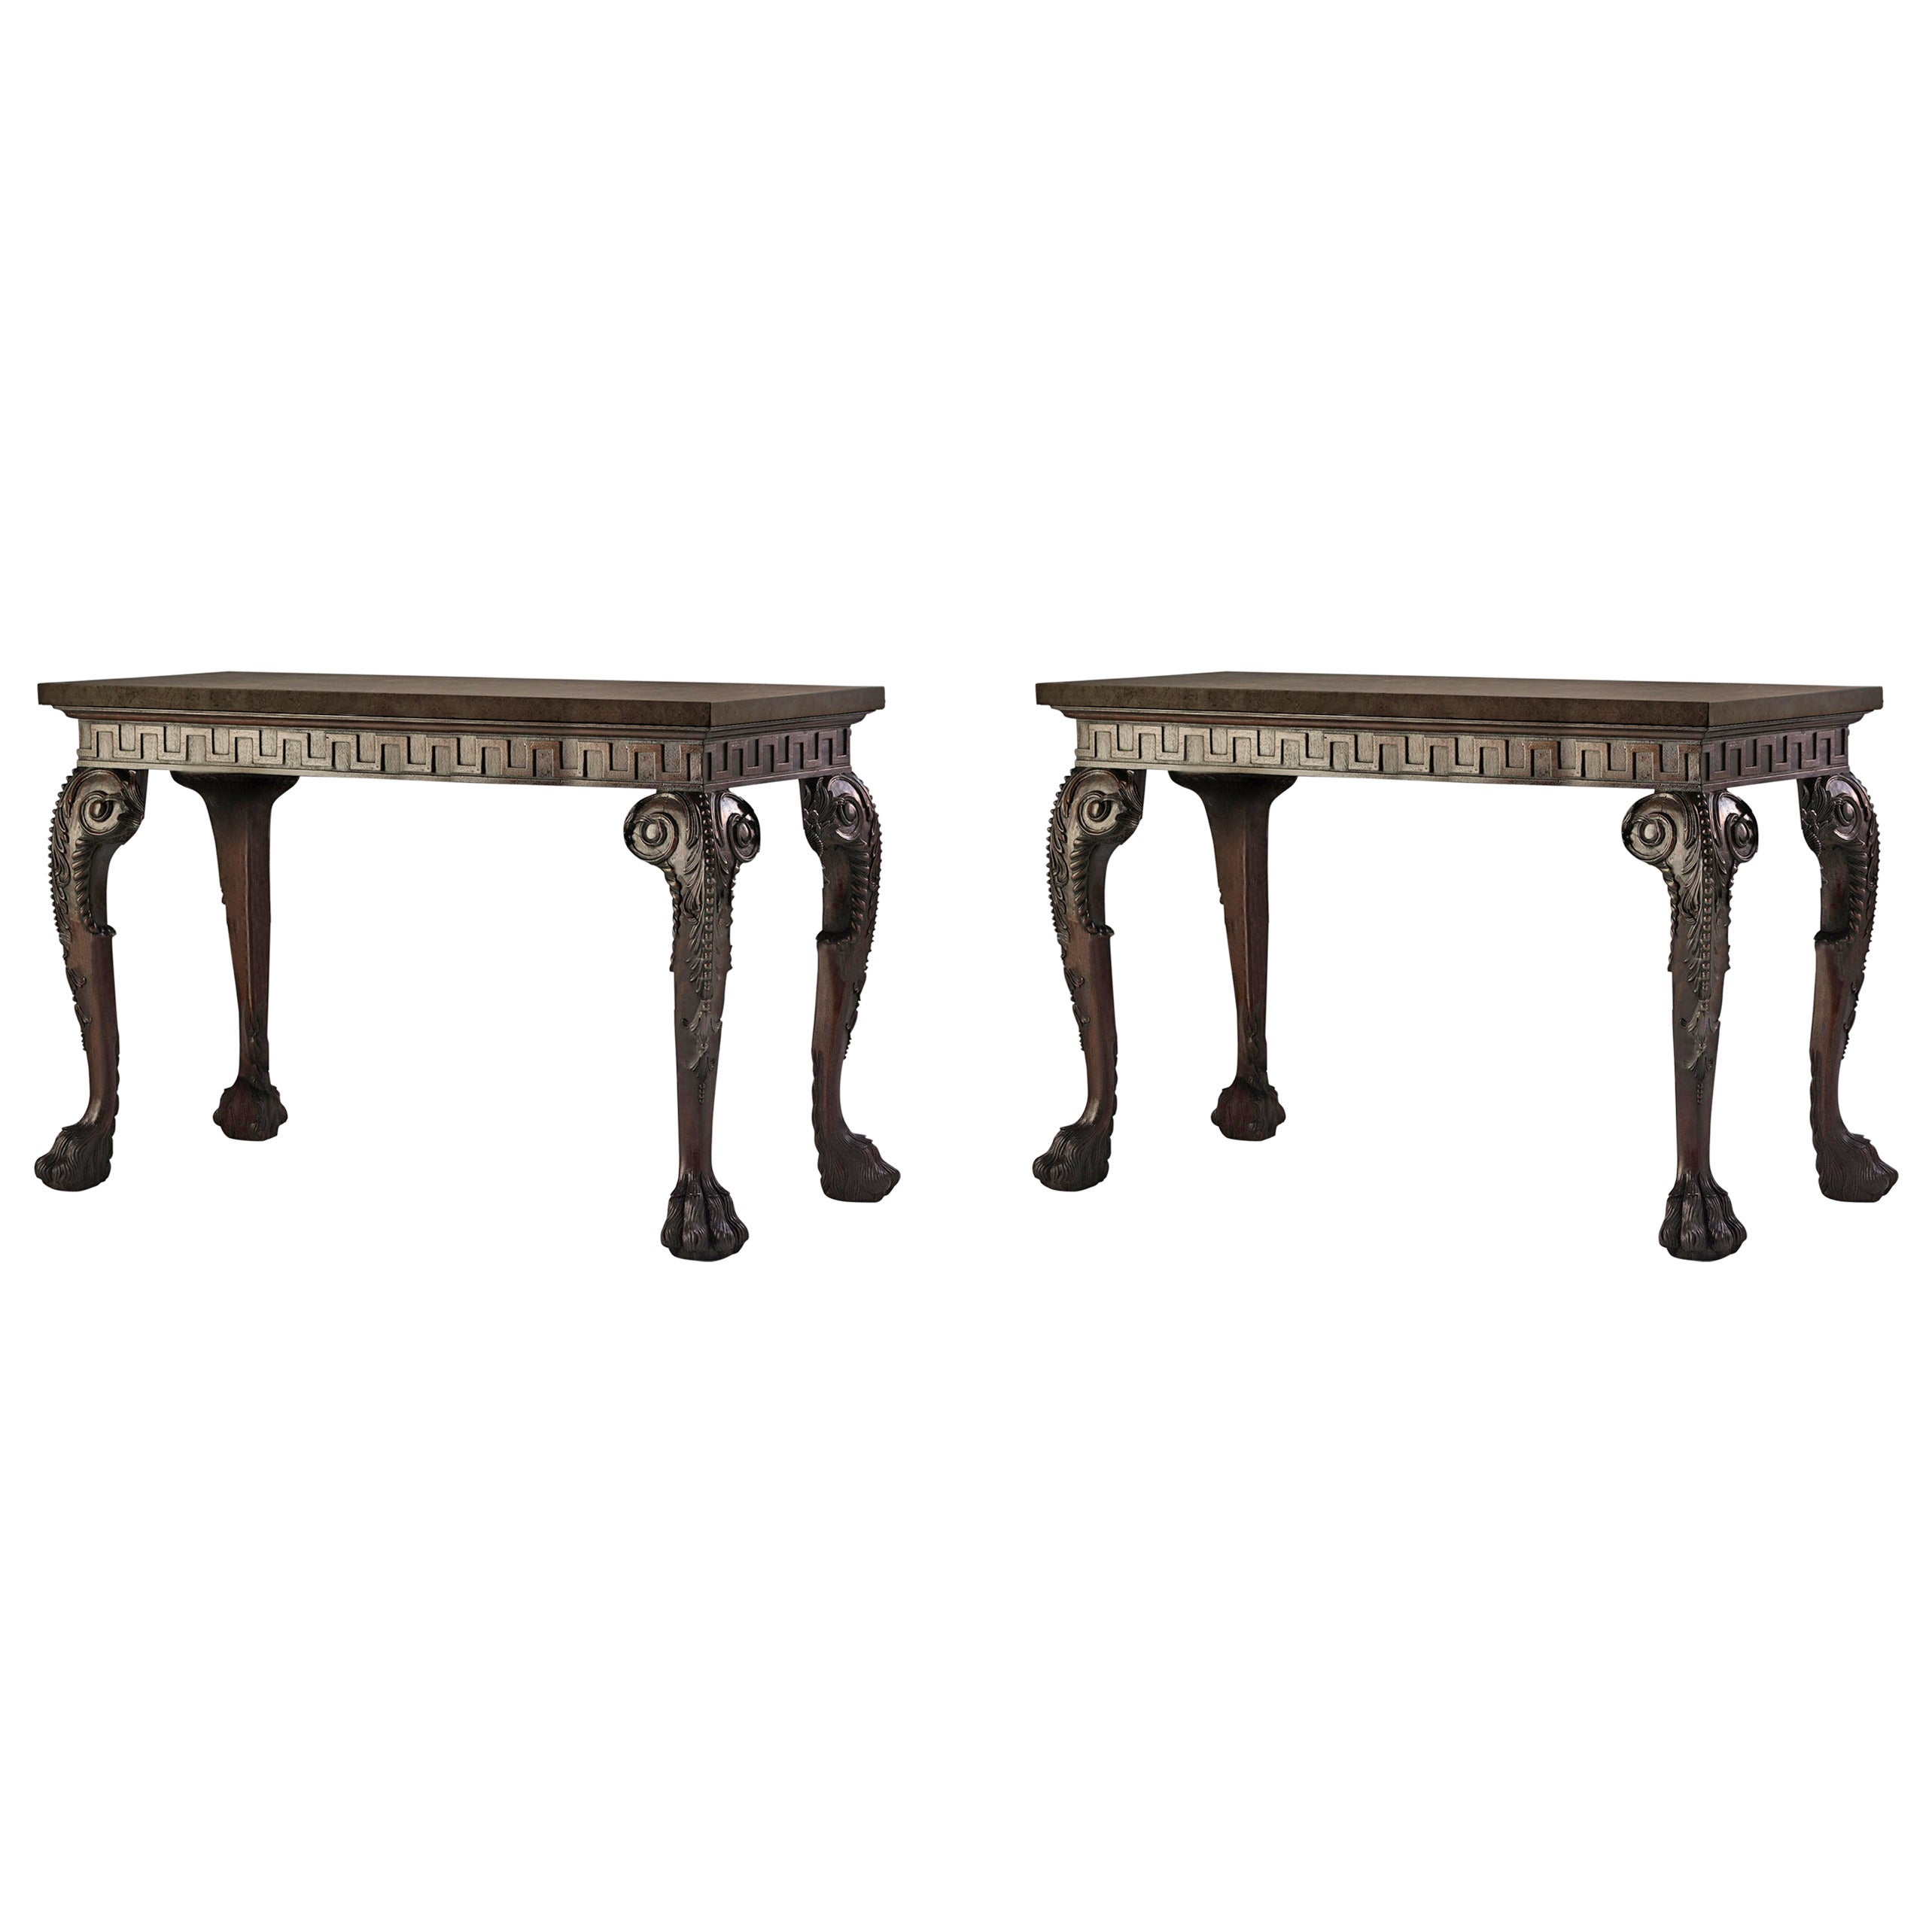 Rare Pair of 18th Century Solid Ebony Tables with 19th Century Alterations For Sale